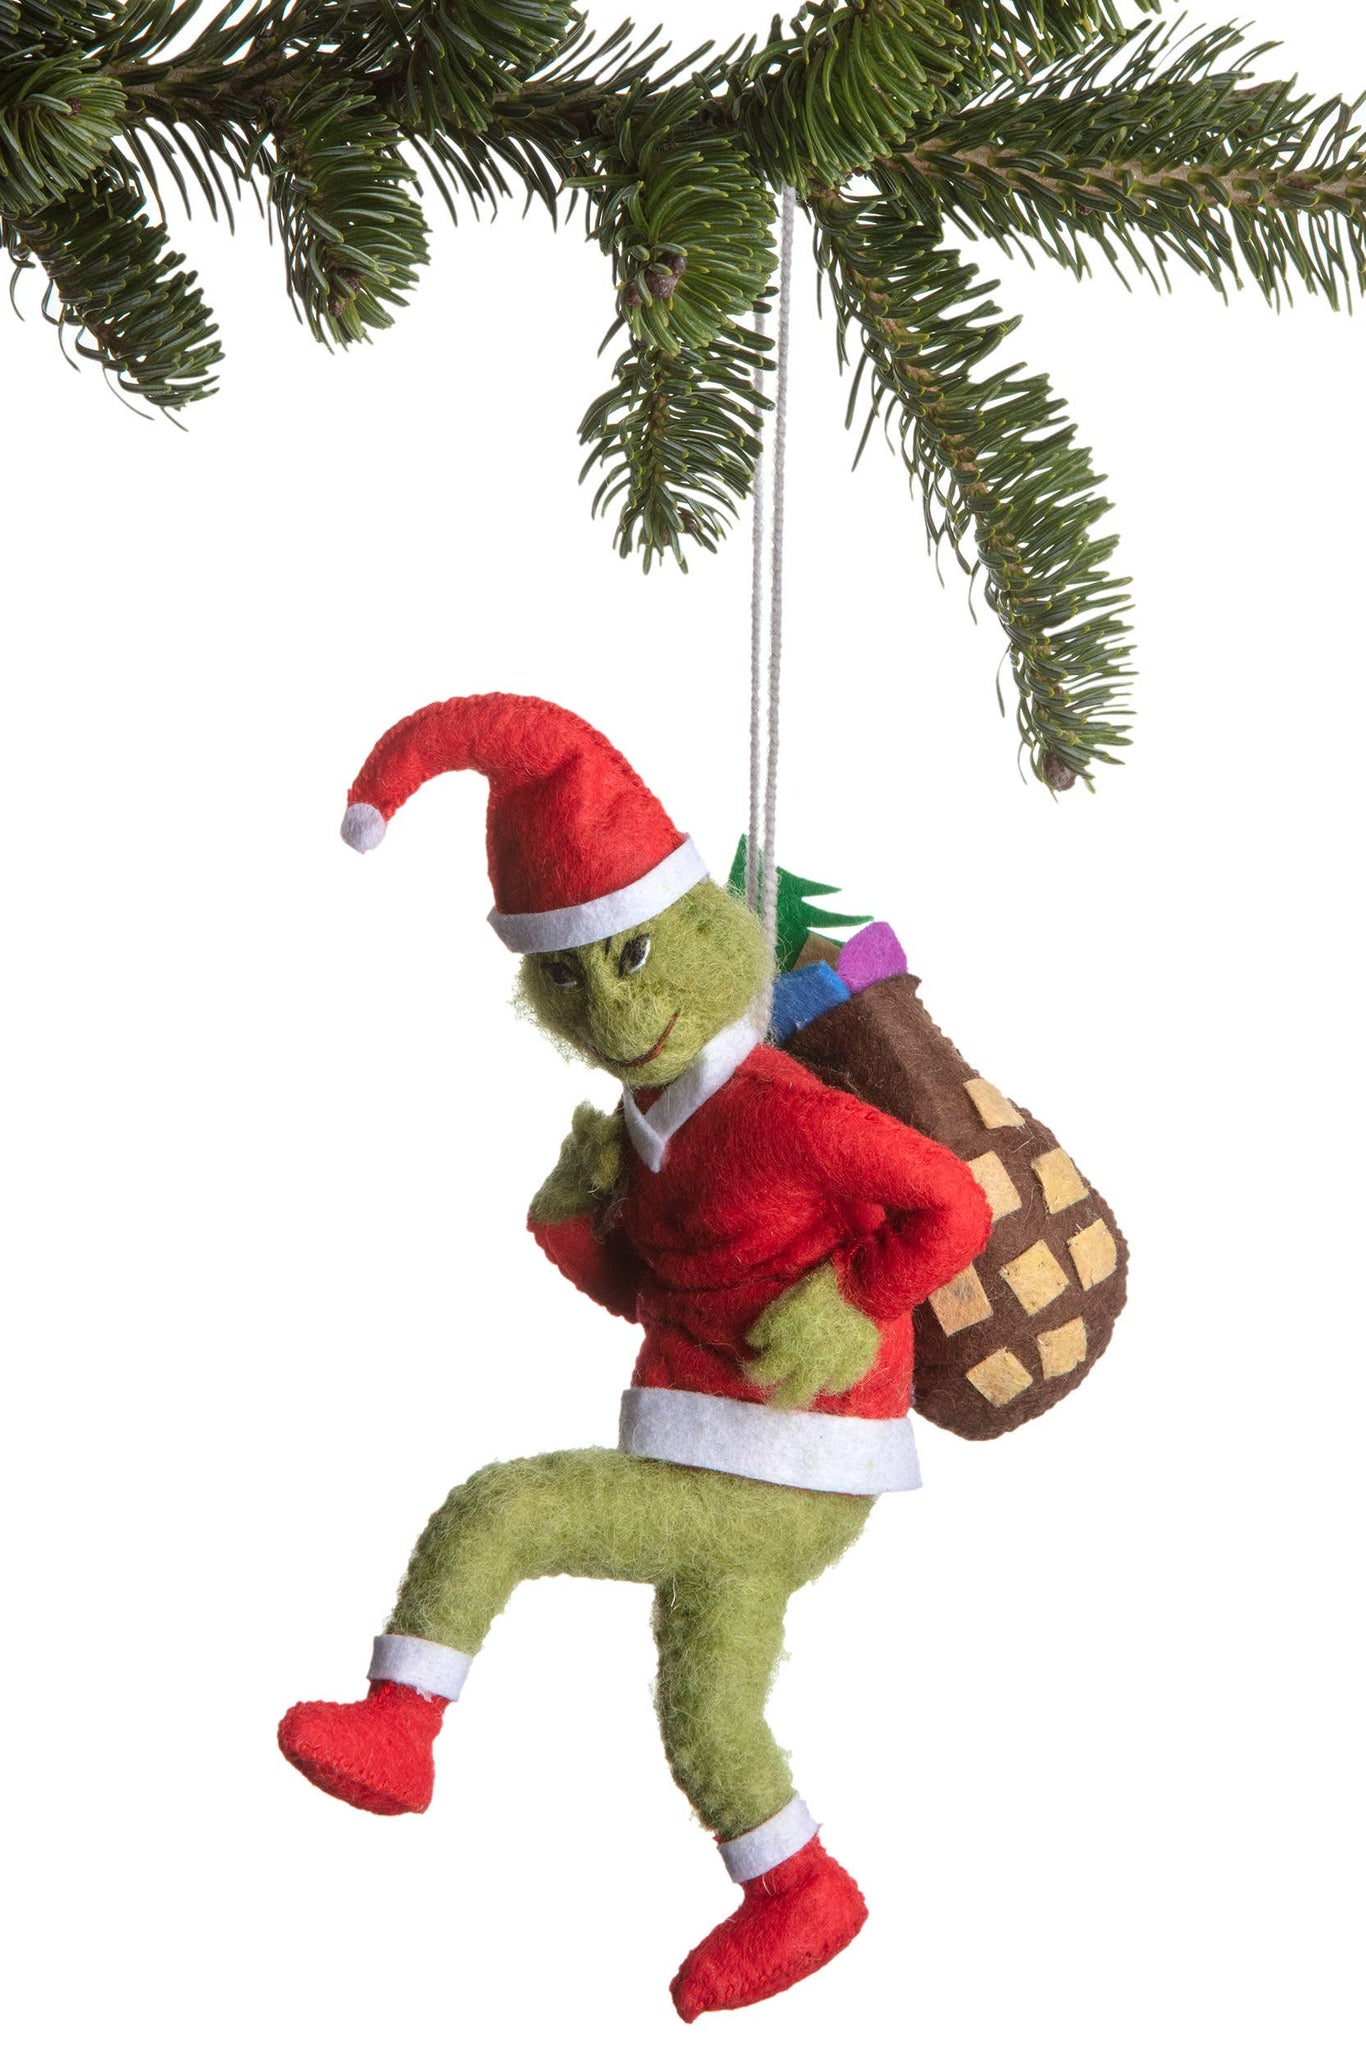 The Grinch Character Ornament